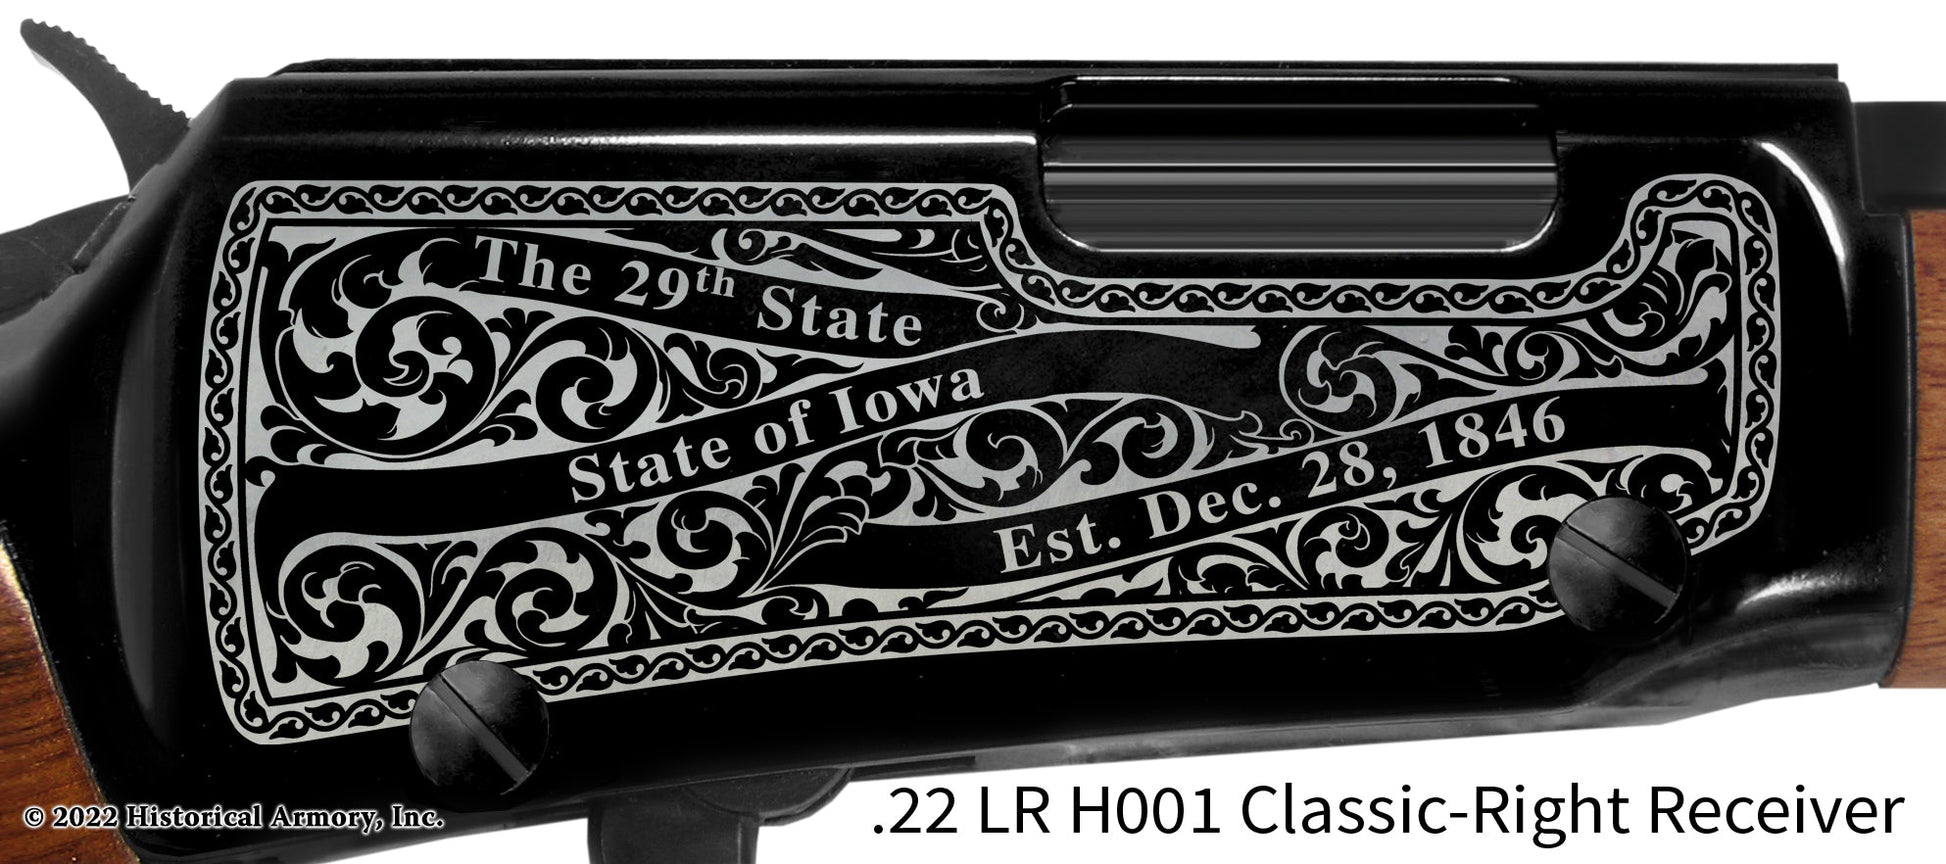 Fremont County Iowa Engraved Henry H001 Rifle